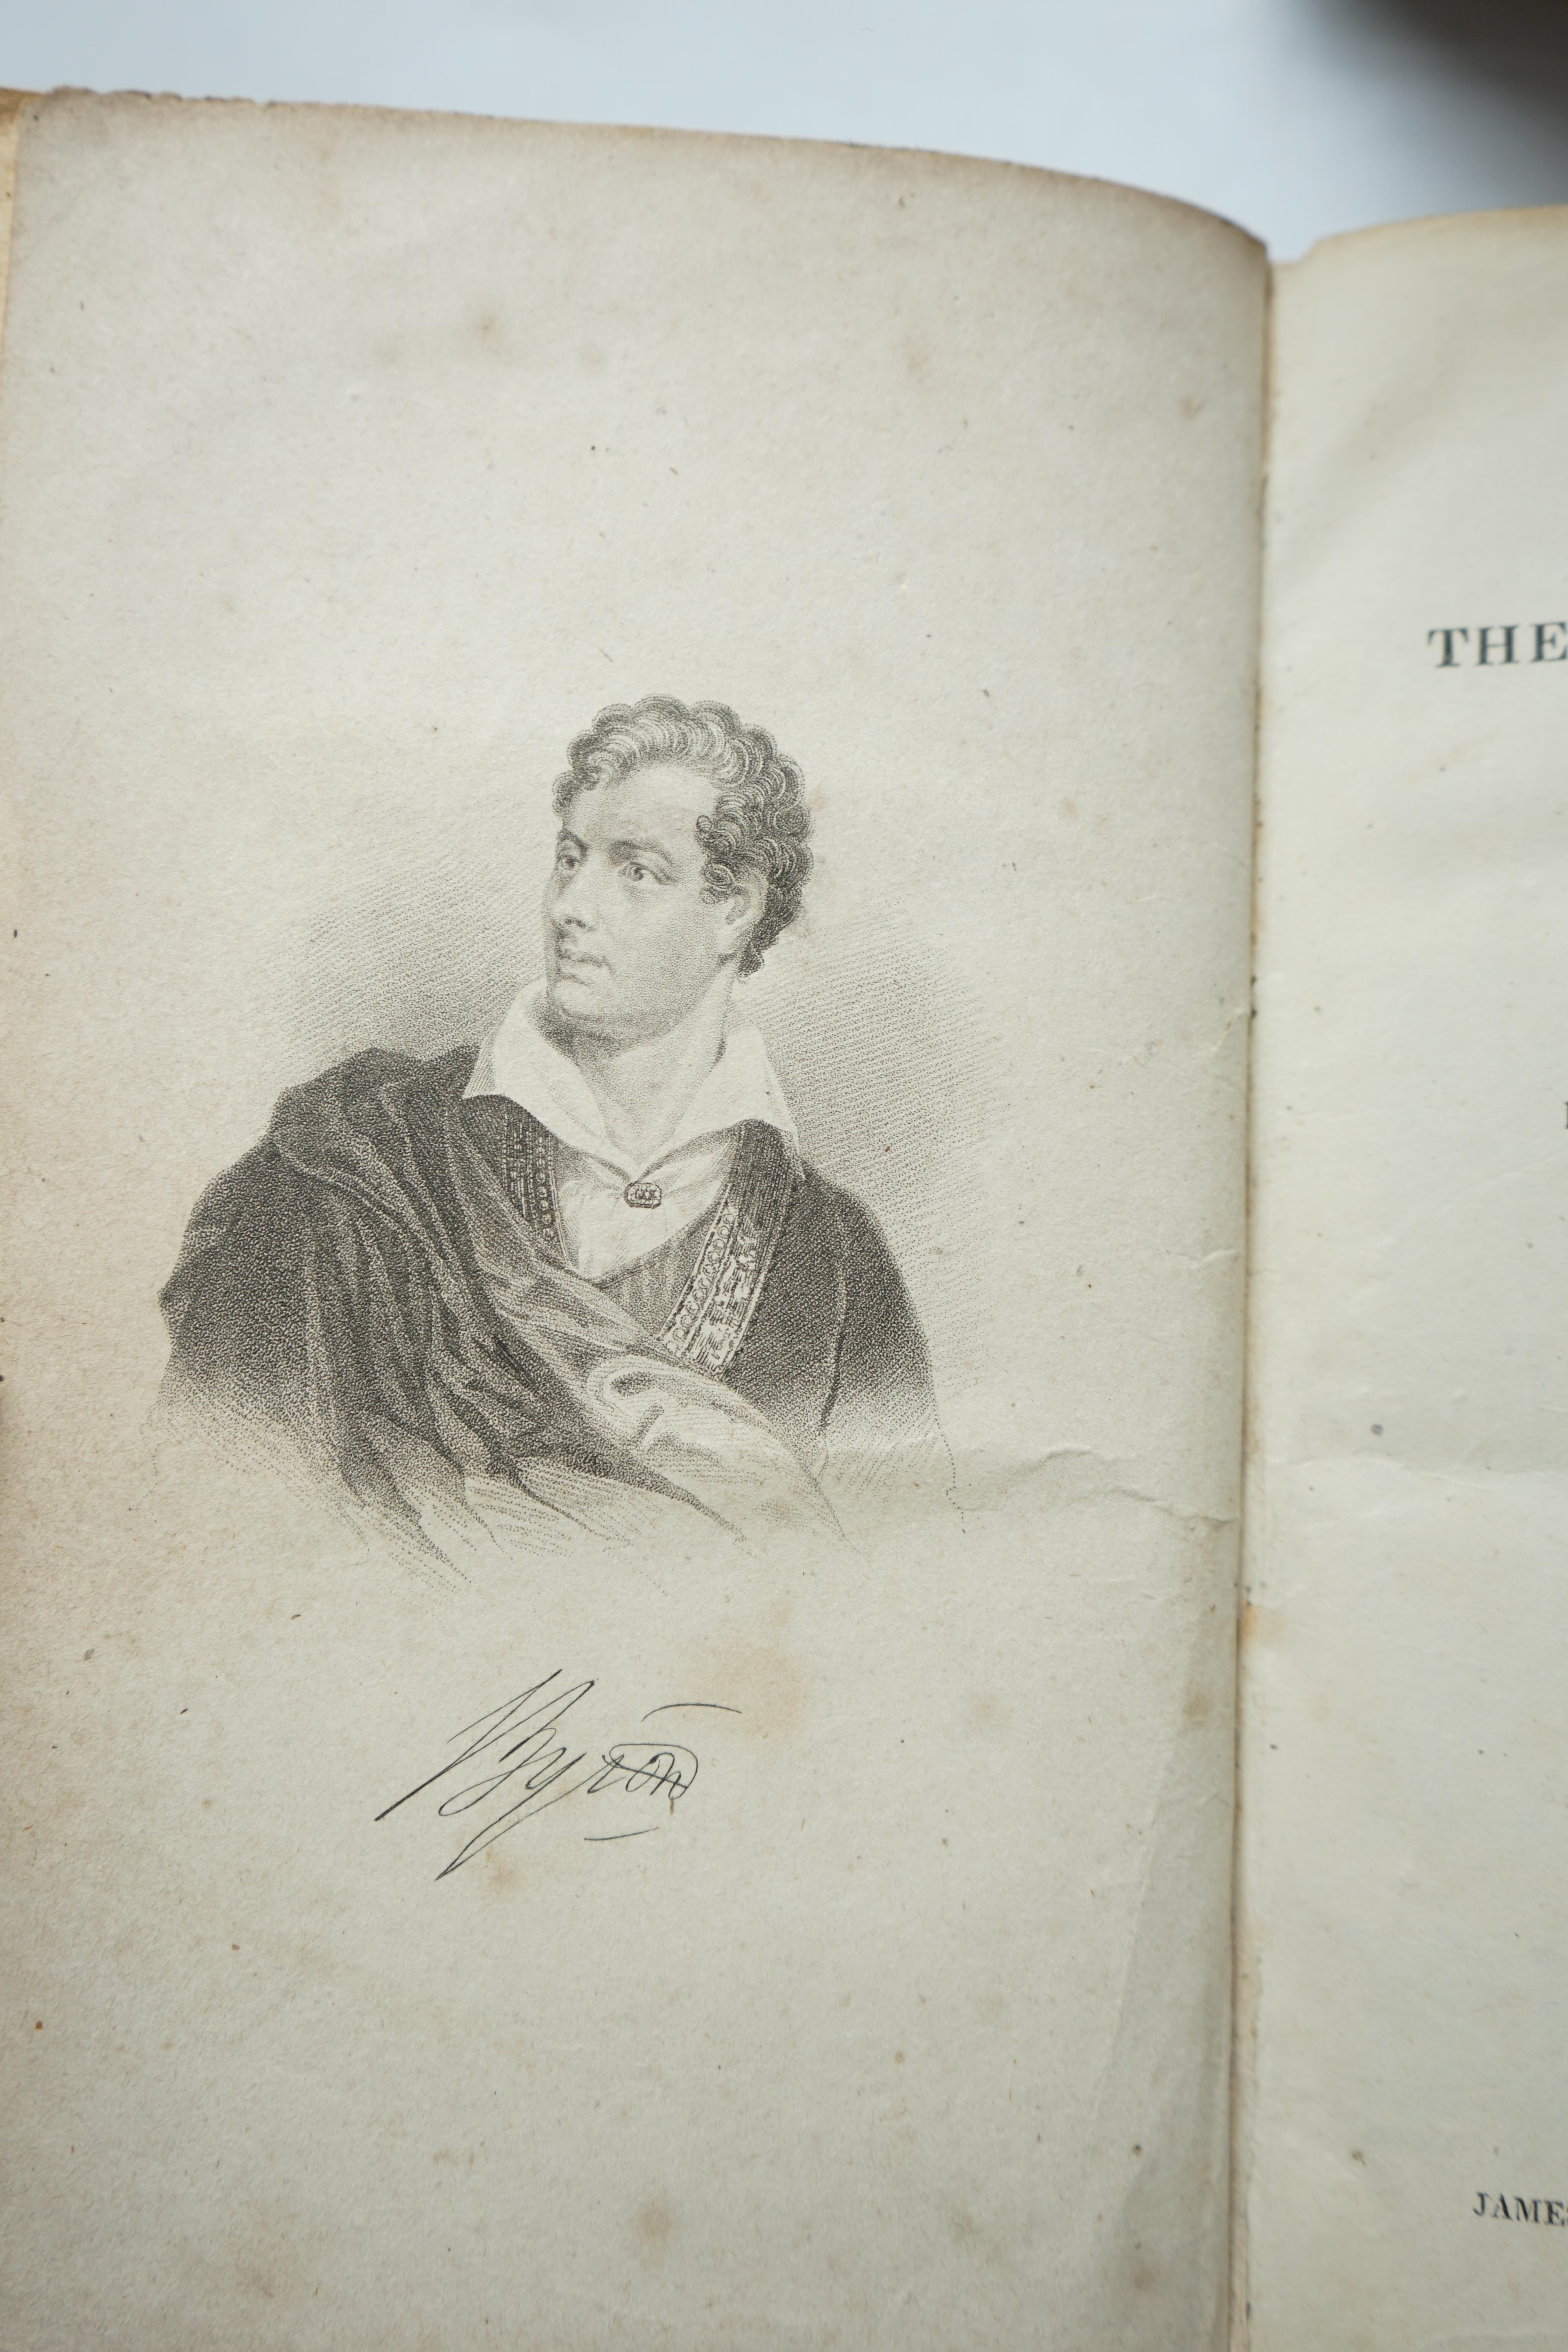 Clinton, George - Memoirs of the Life and Writings of Lord Byron, calf rebacked, 1832; The Poetical Works of Lord Byron with life engravings in steel, (The Landscape Edition of Poets), Gall & Inglis, nd; Dallas, R.C - Co